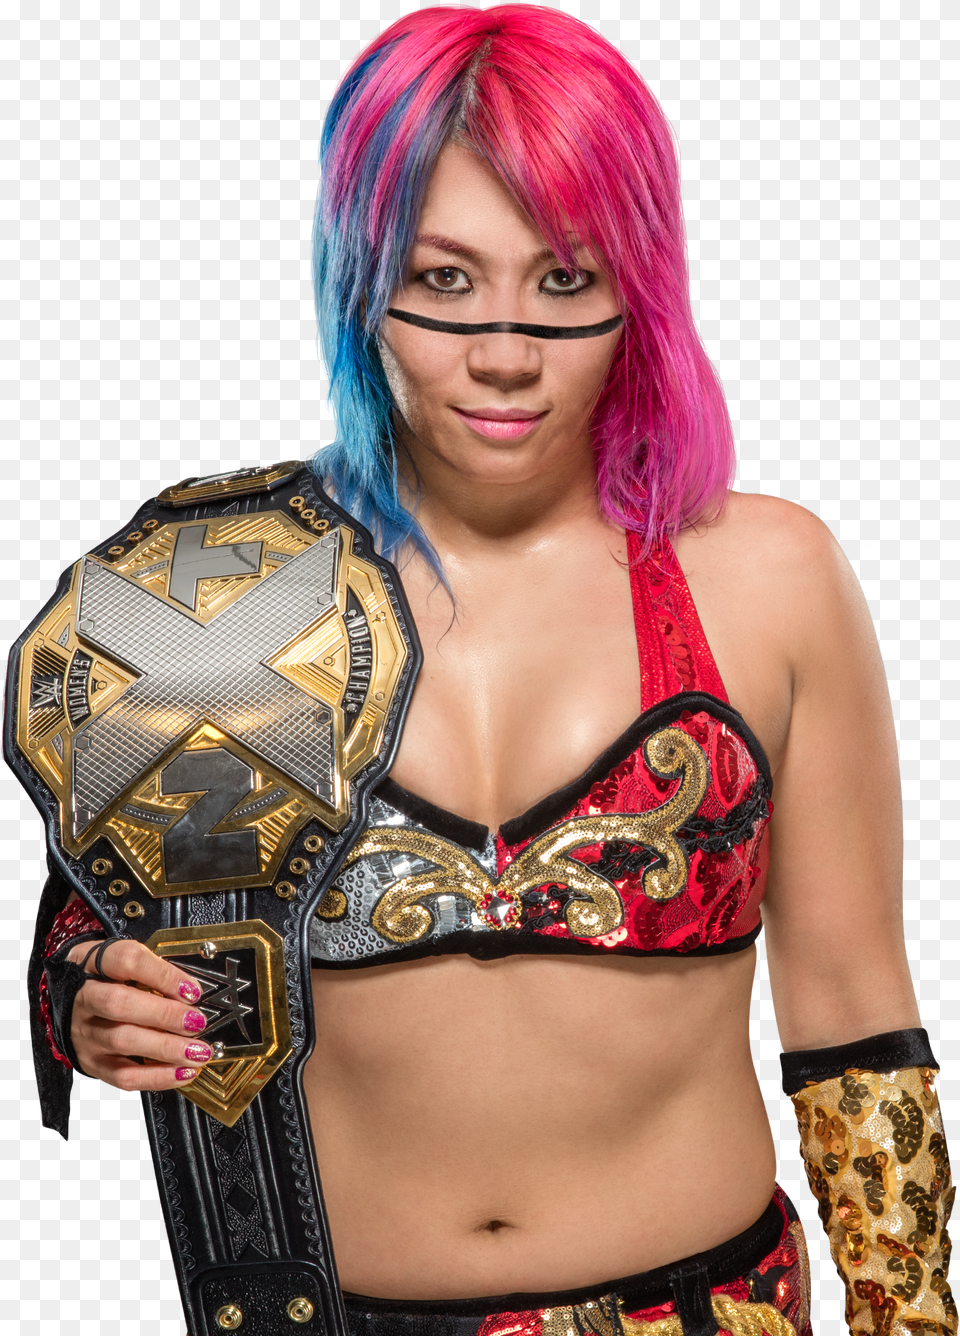 New Render Of Asuka As Nxt Women39s Champion Asuka Nxt Women39s Champion Free Transparent Png